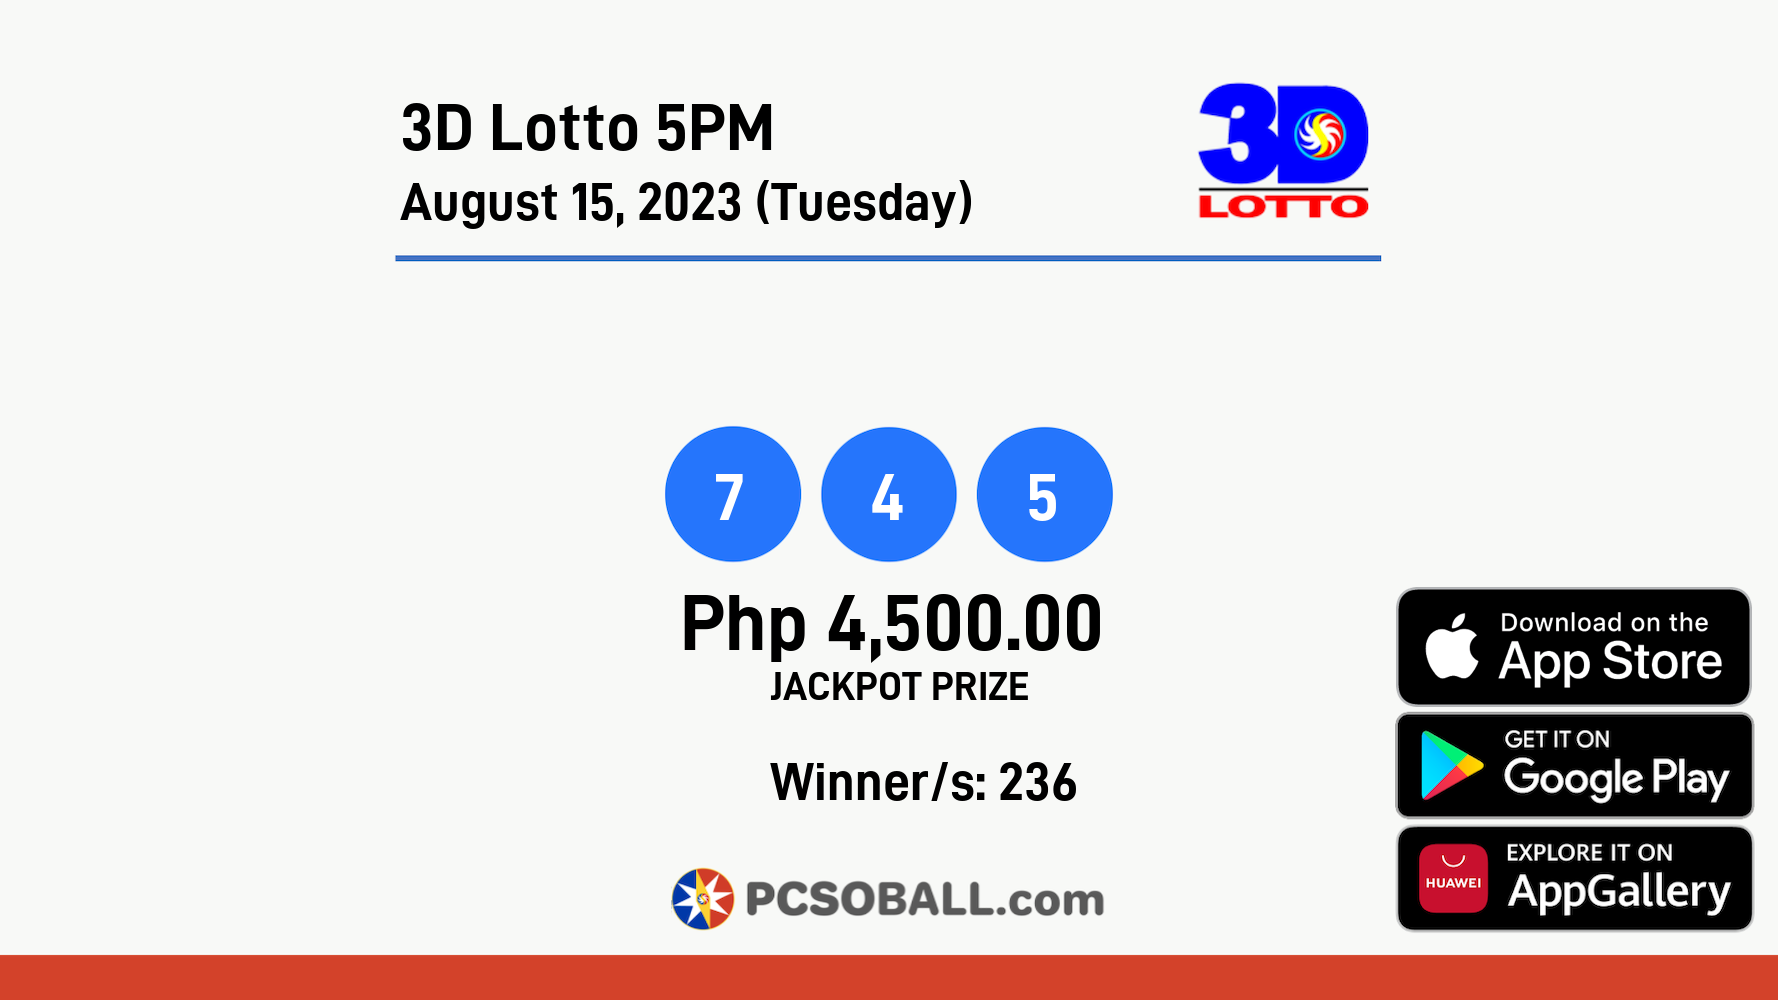 3D Lotto 5PM August 15, 2023 (Tuesday) Result